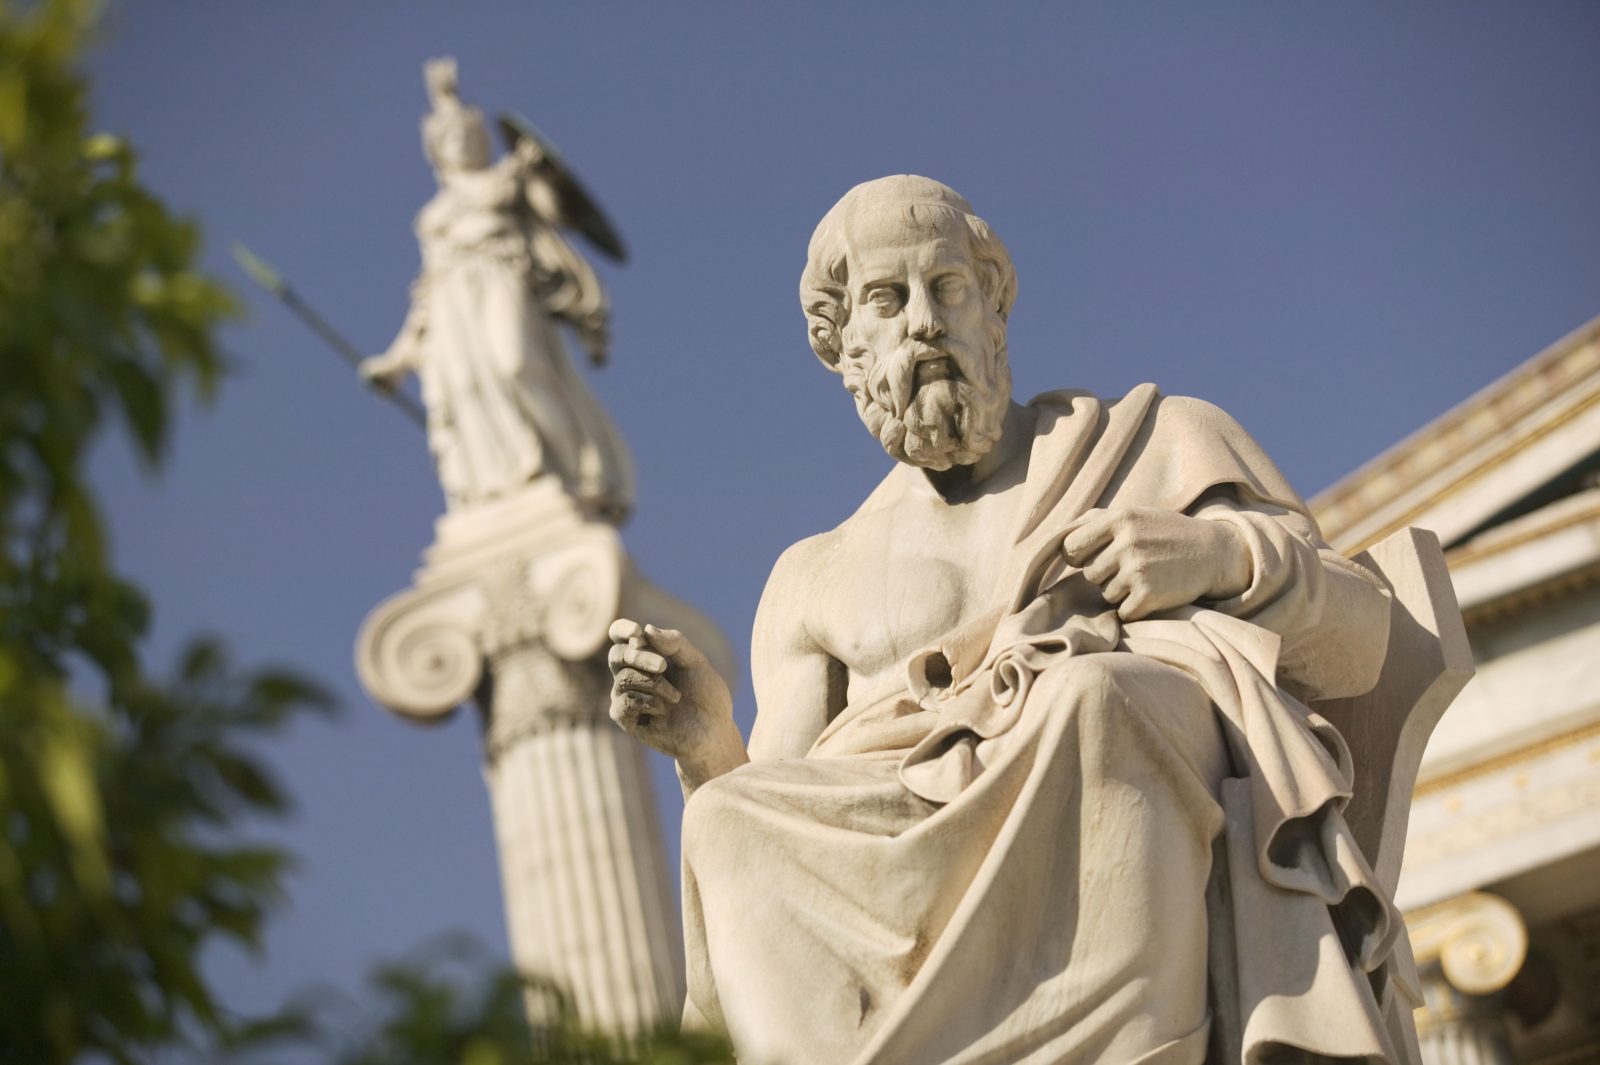 If You Get More Than 12/15 on This General Knowledge Quiz, You Are Too Smart Plato